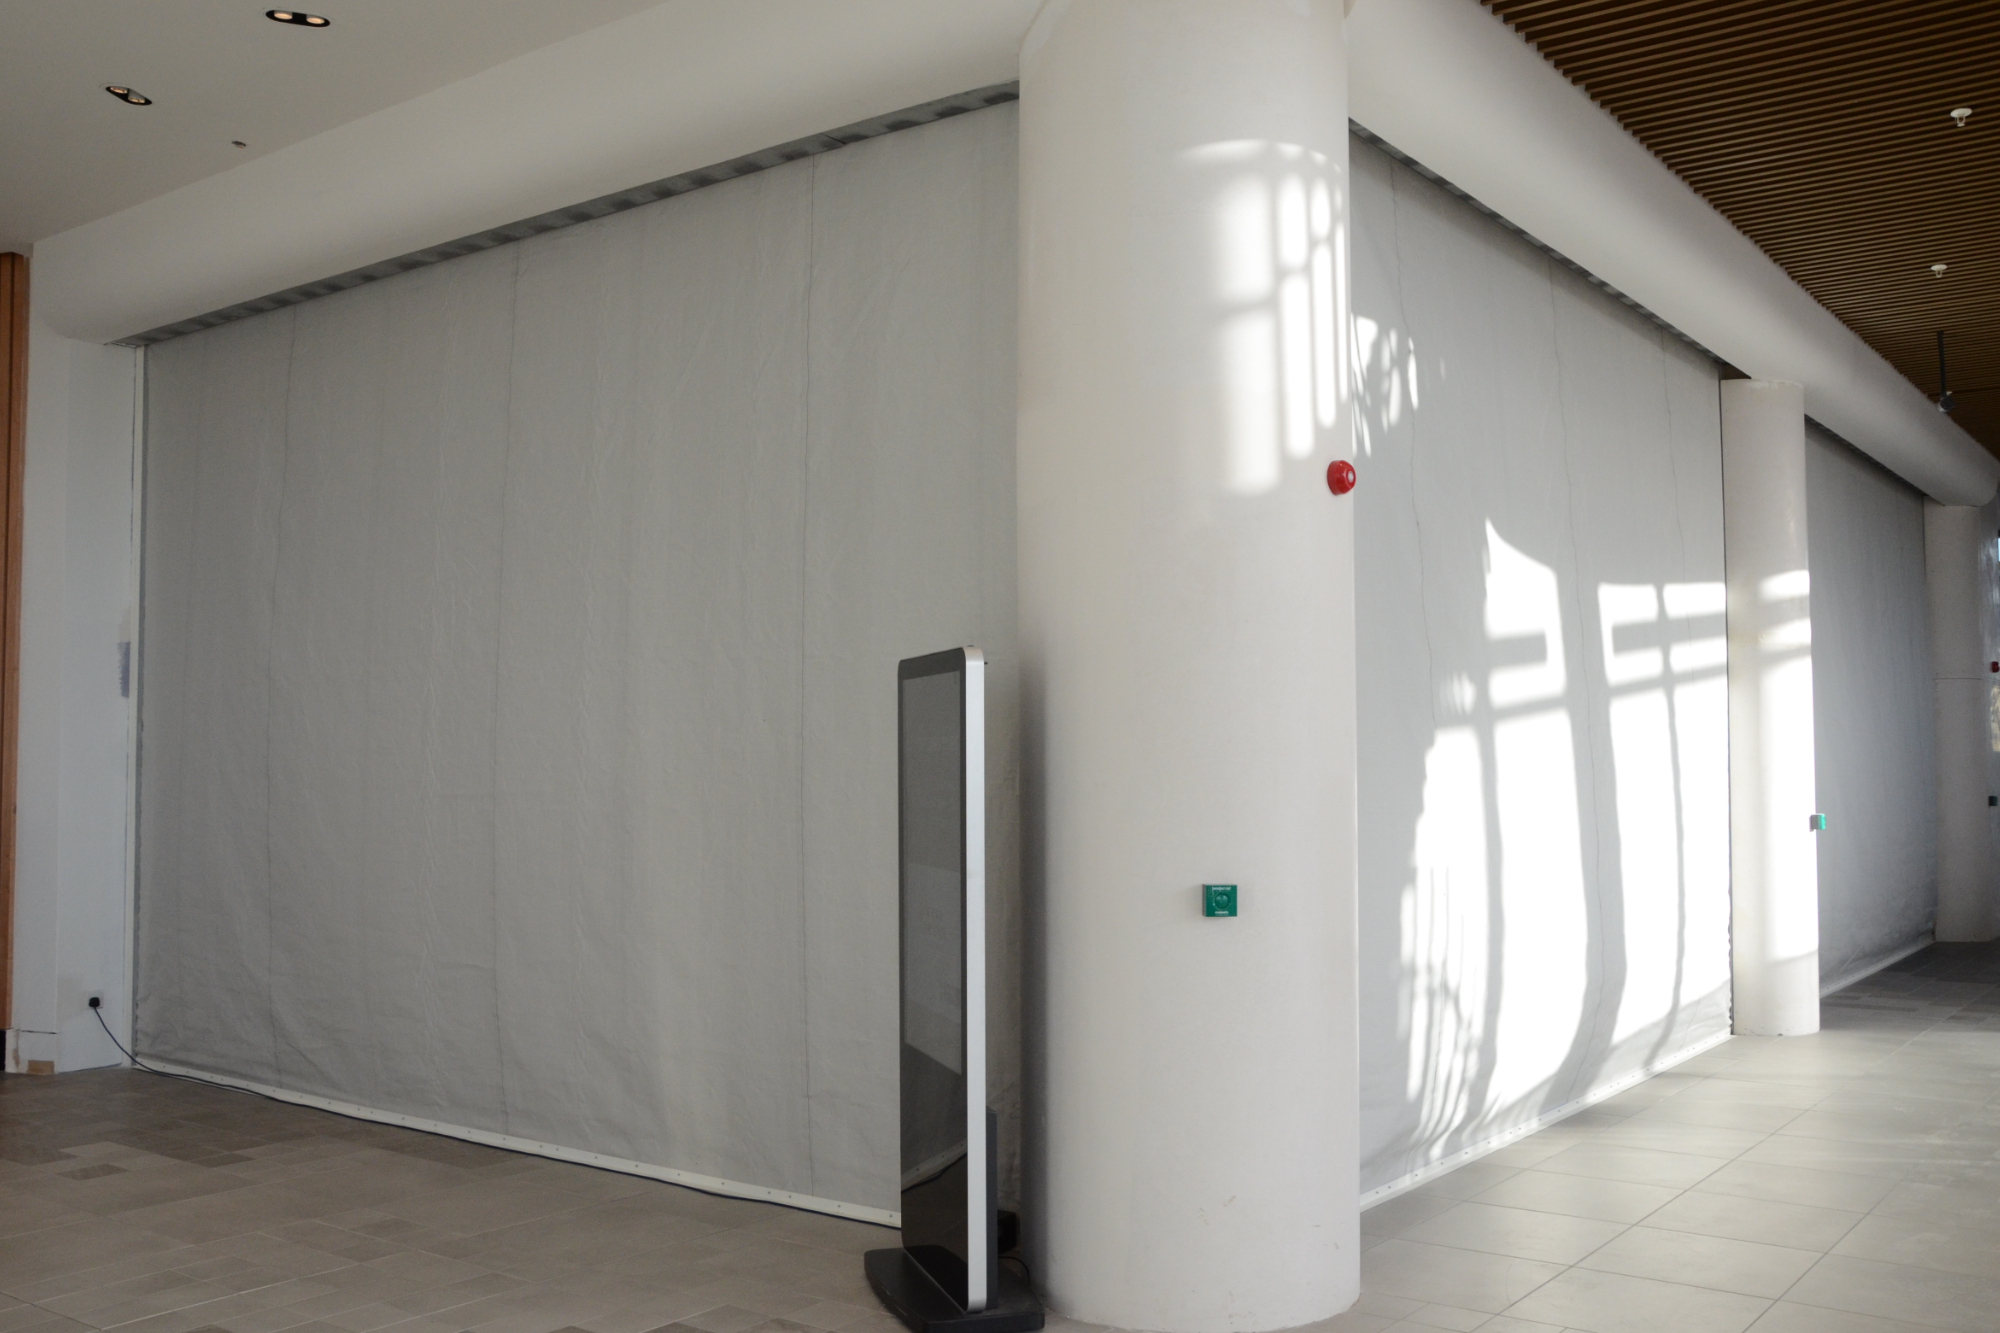 Guide to BS 8524 Fire Curtains